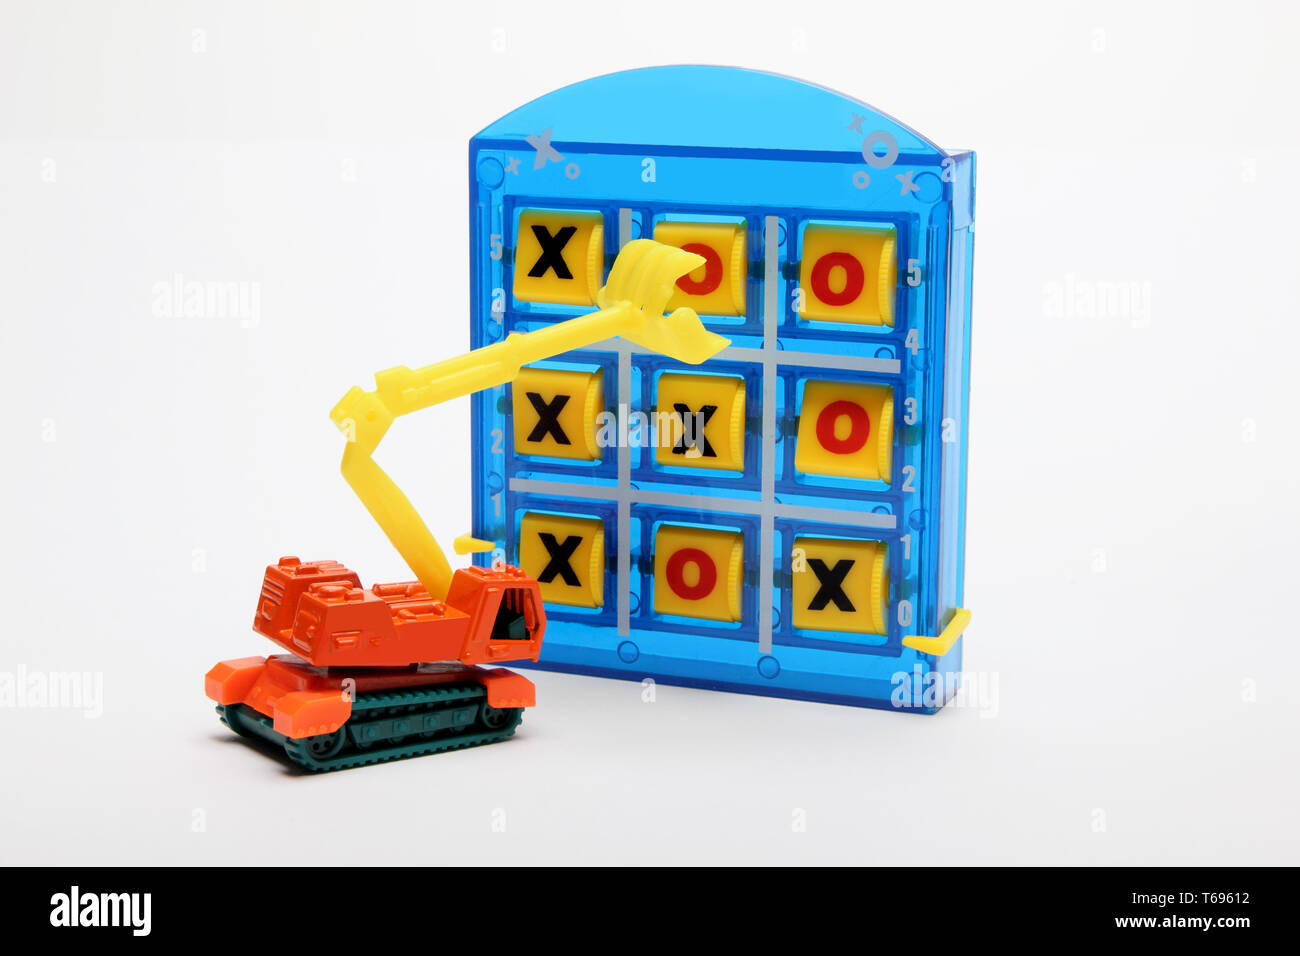 Tic Tac Toe and Toy Earthmover on White Background Stock Photo